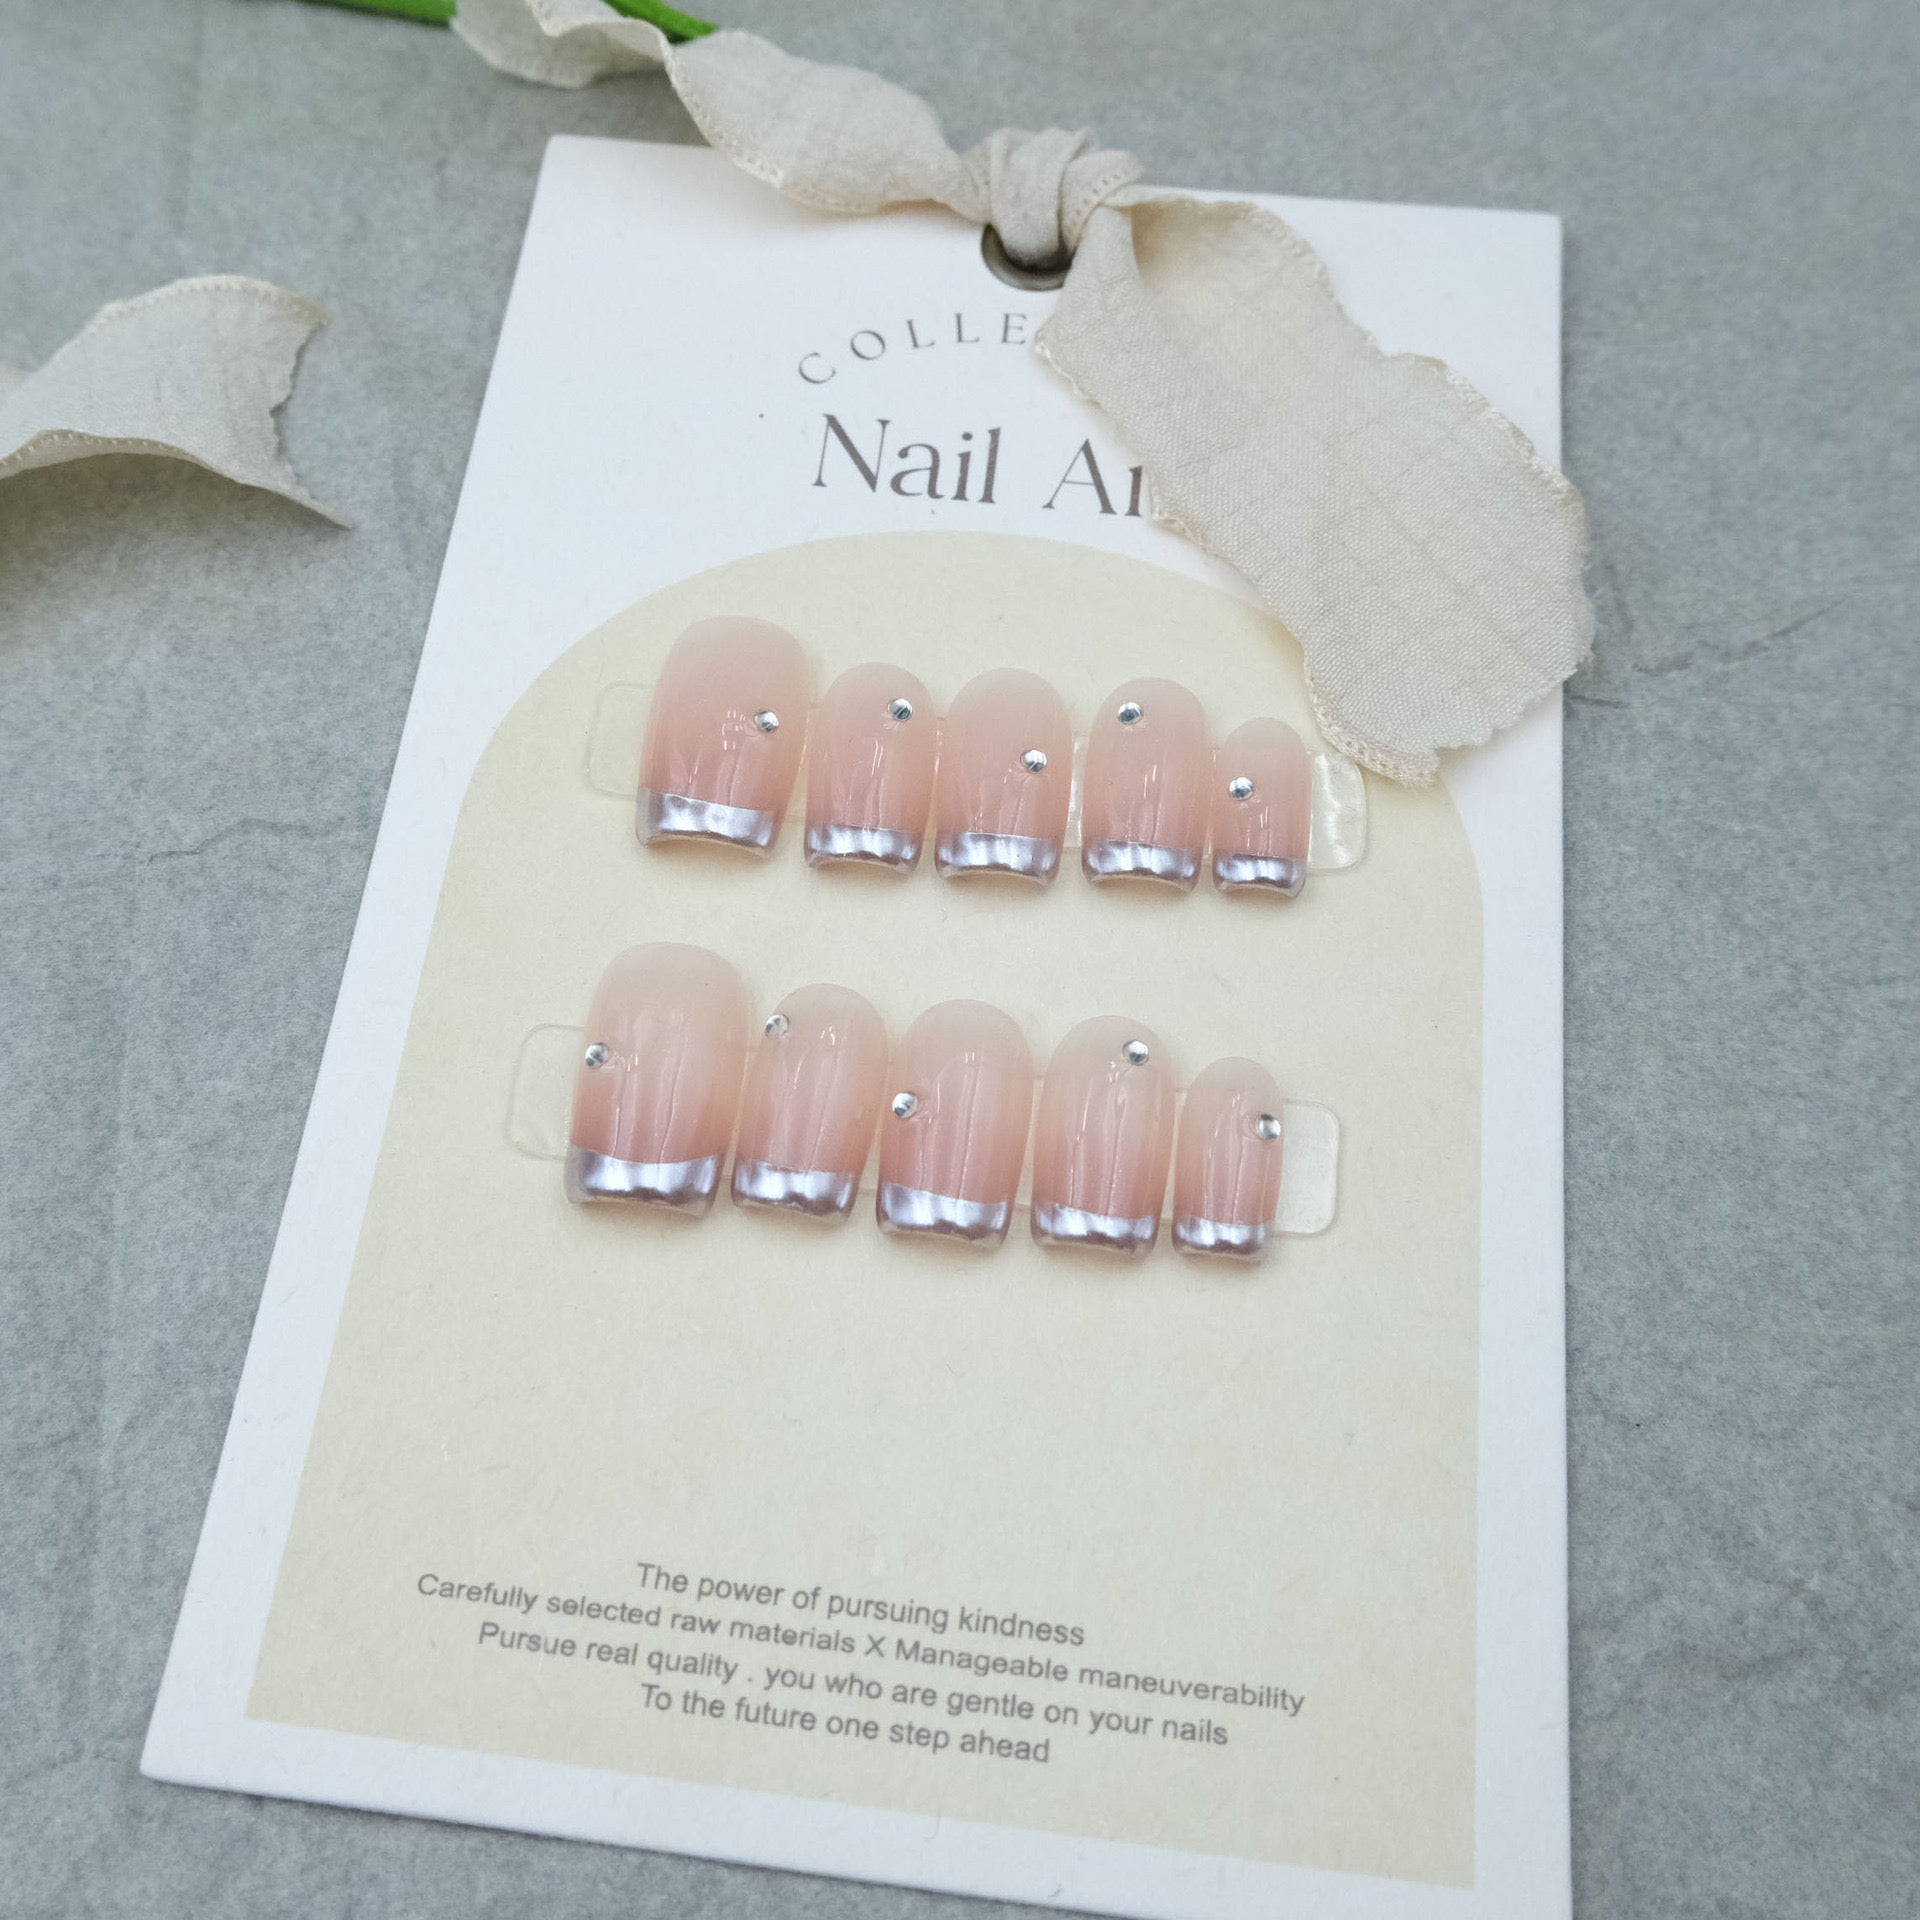 Silver start with cat eye(short) Reusable Hand Made Press On Nails - TiffsGift